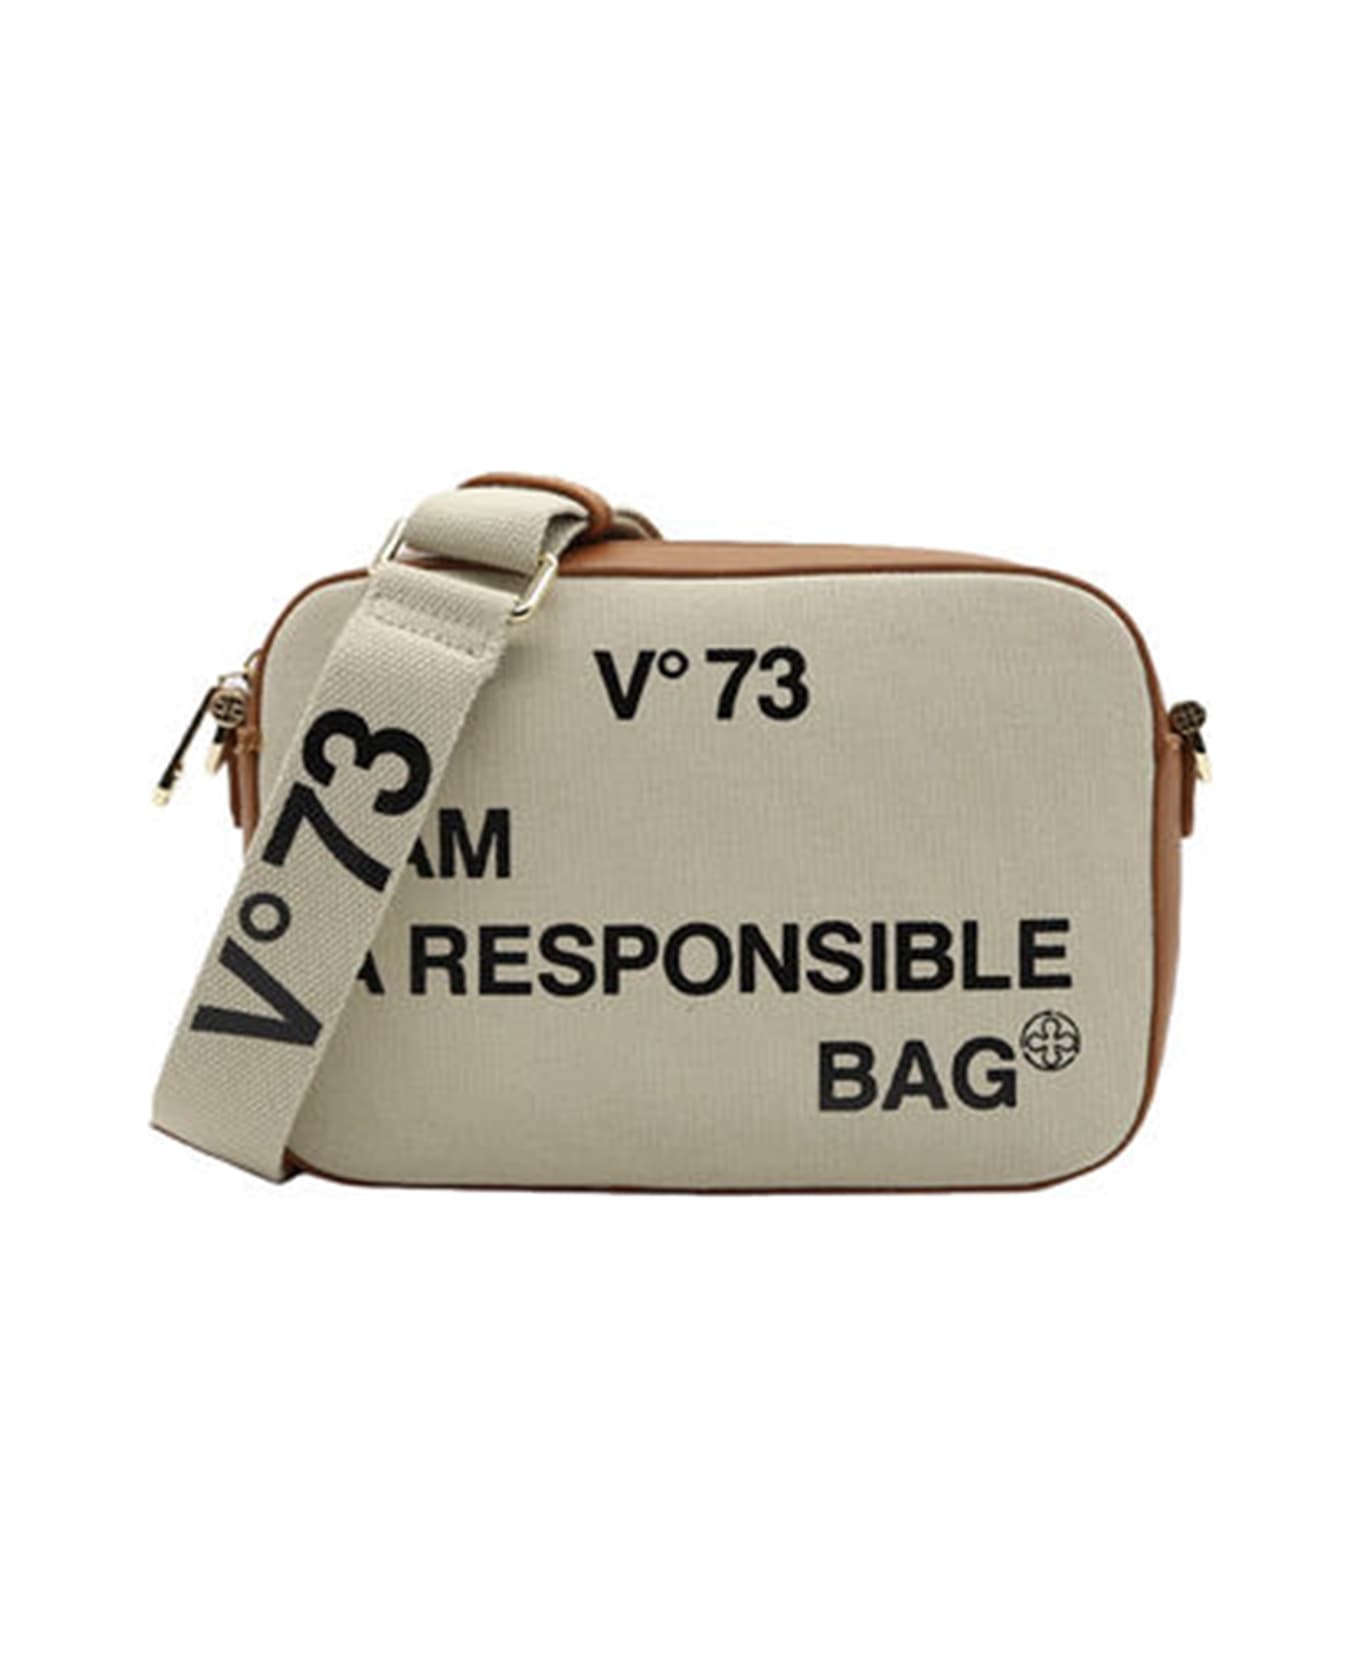 V73 Responsibility Shoulder Bag In Cotton - NATURALE/CUOIO